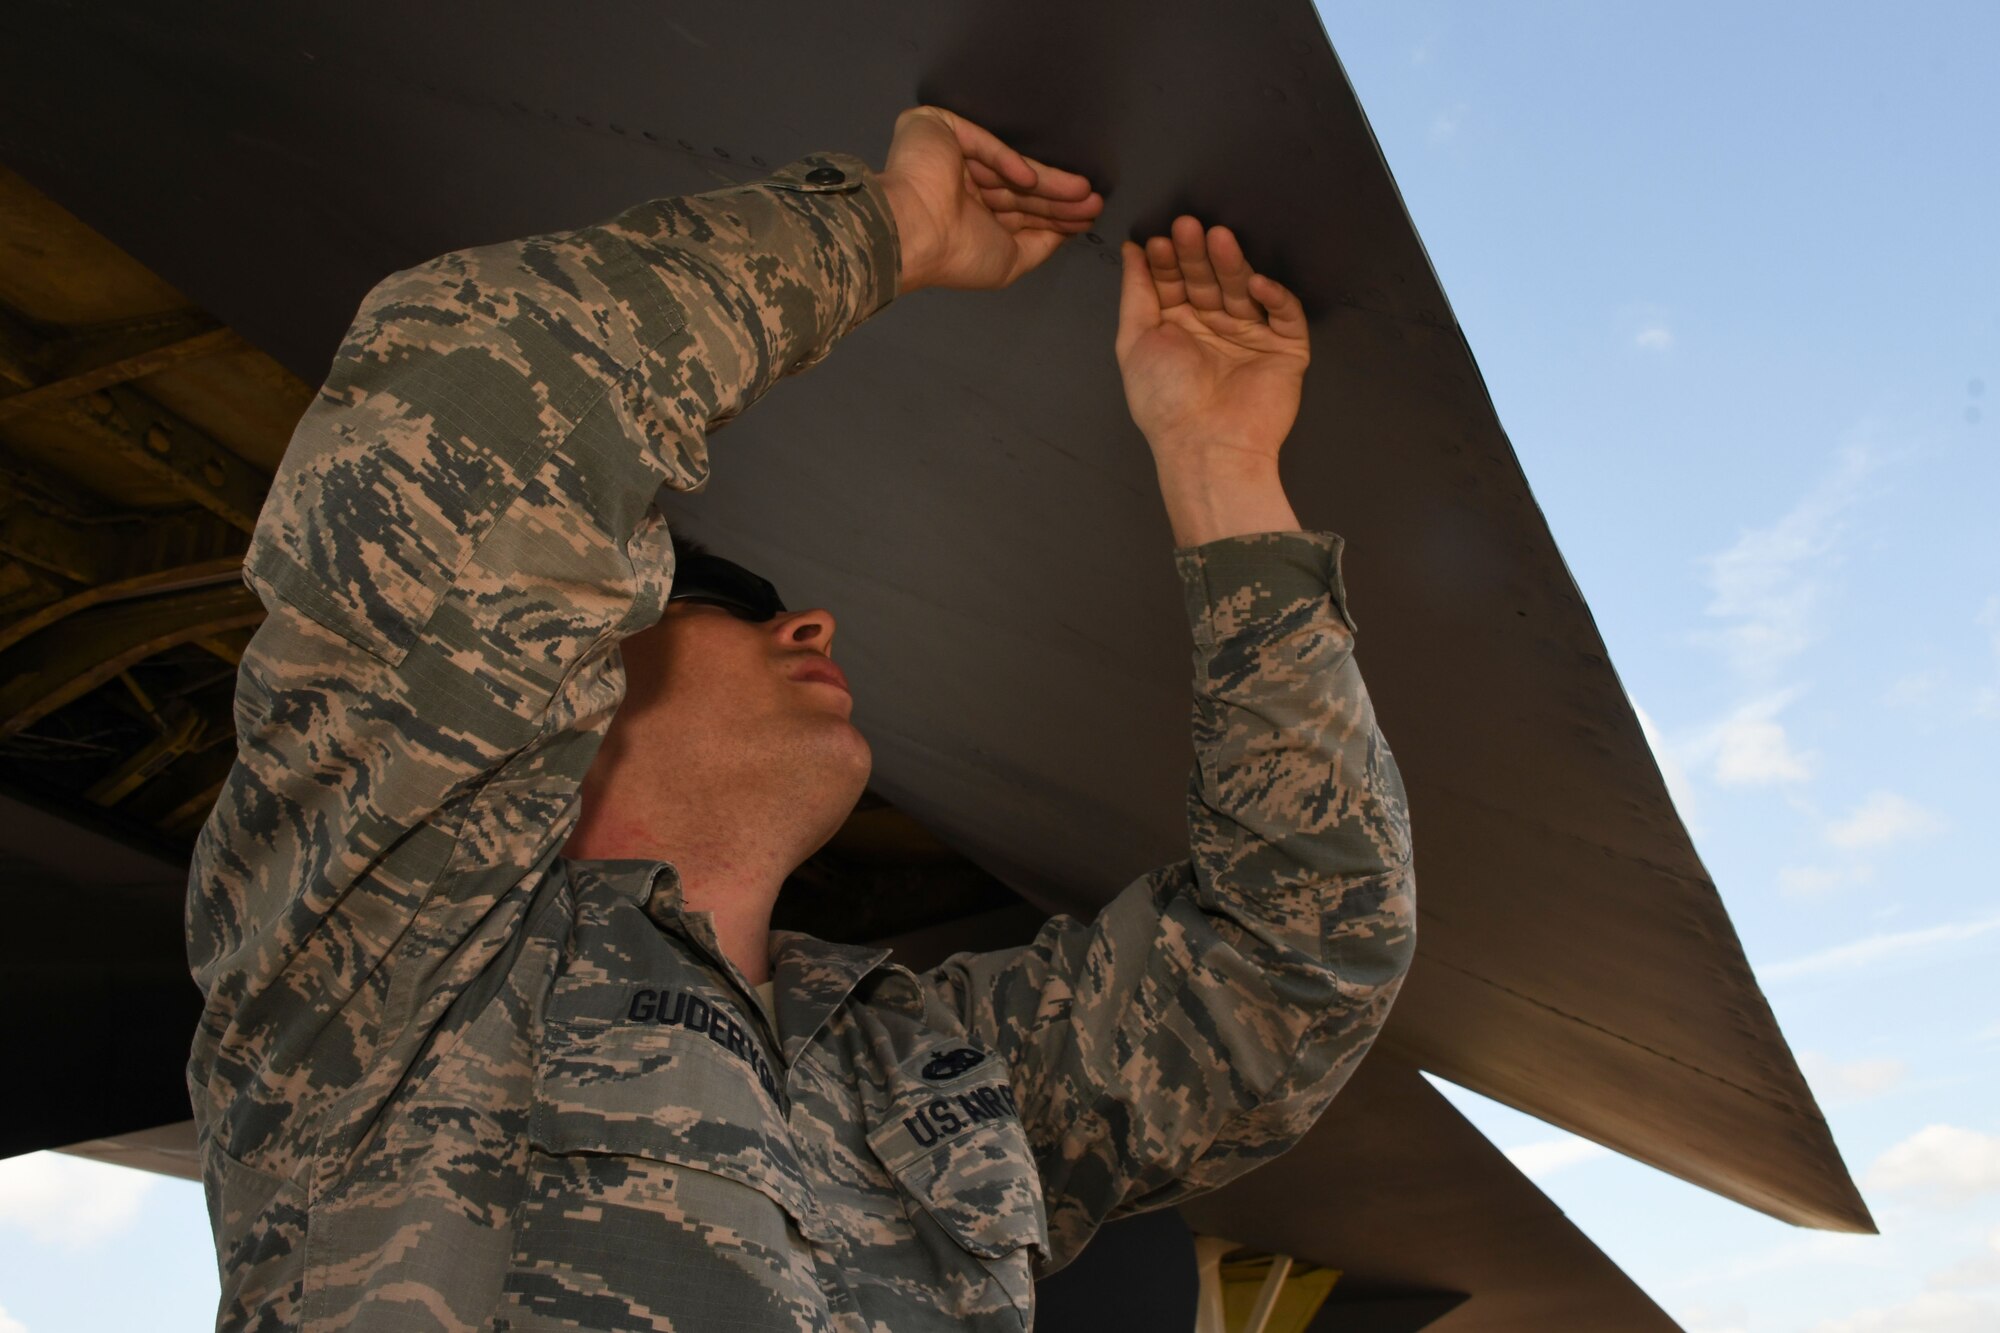 U.S. Air Force Master Sgt. Mike Guderyon, 307th Aircraft Maintenance Squadron aircraft structural maintainer, checks a B-52 Stratofortress for wear and tear after its trans-atlantic flight from Barksdale Air Force Base, La. to Royal Air Force Fairford, U.K., Sep. 1, 2017.